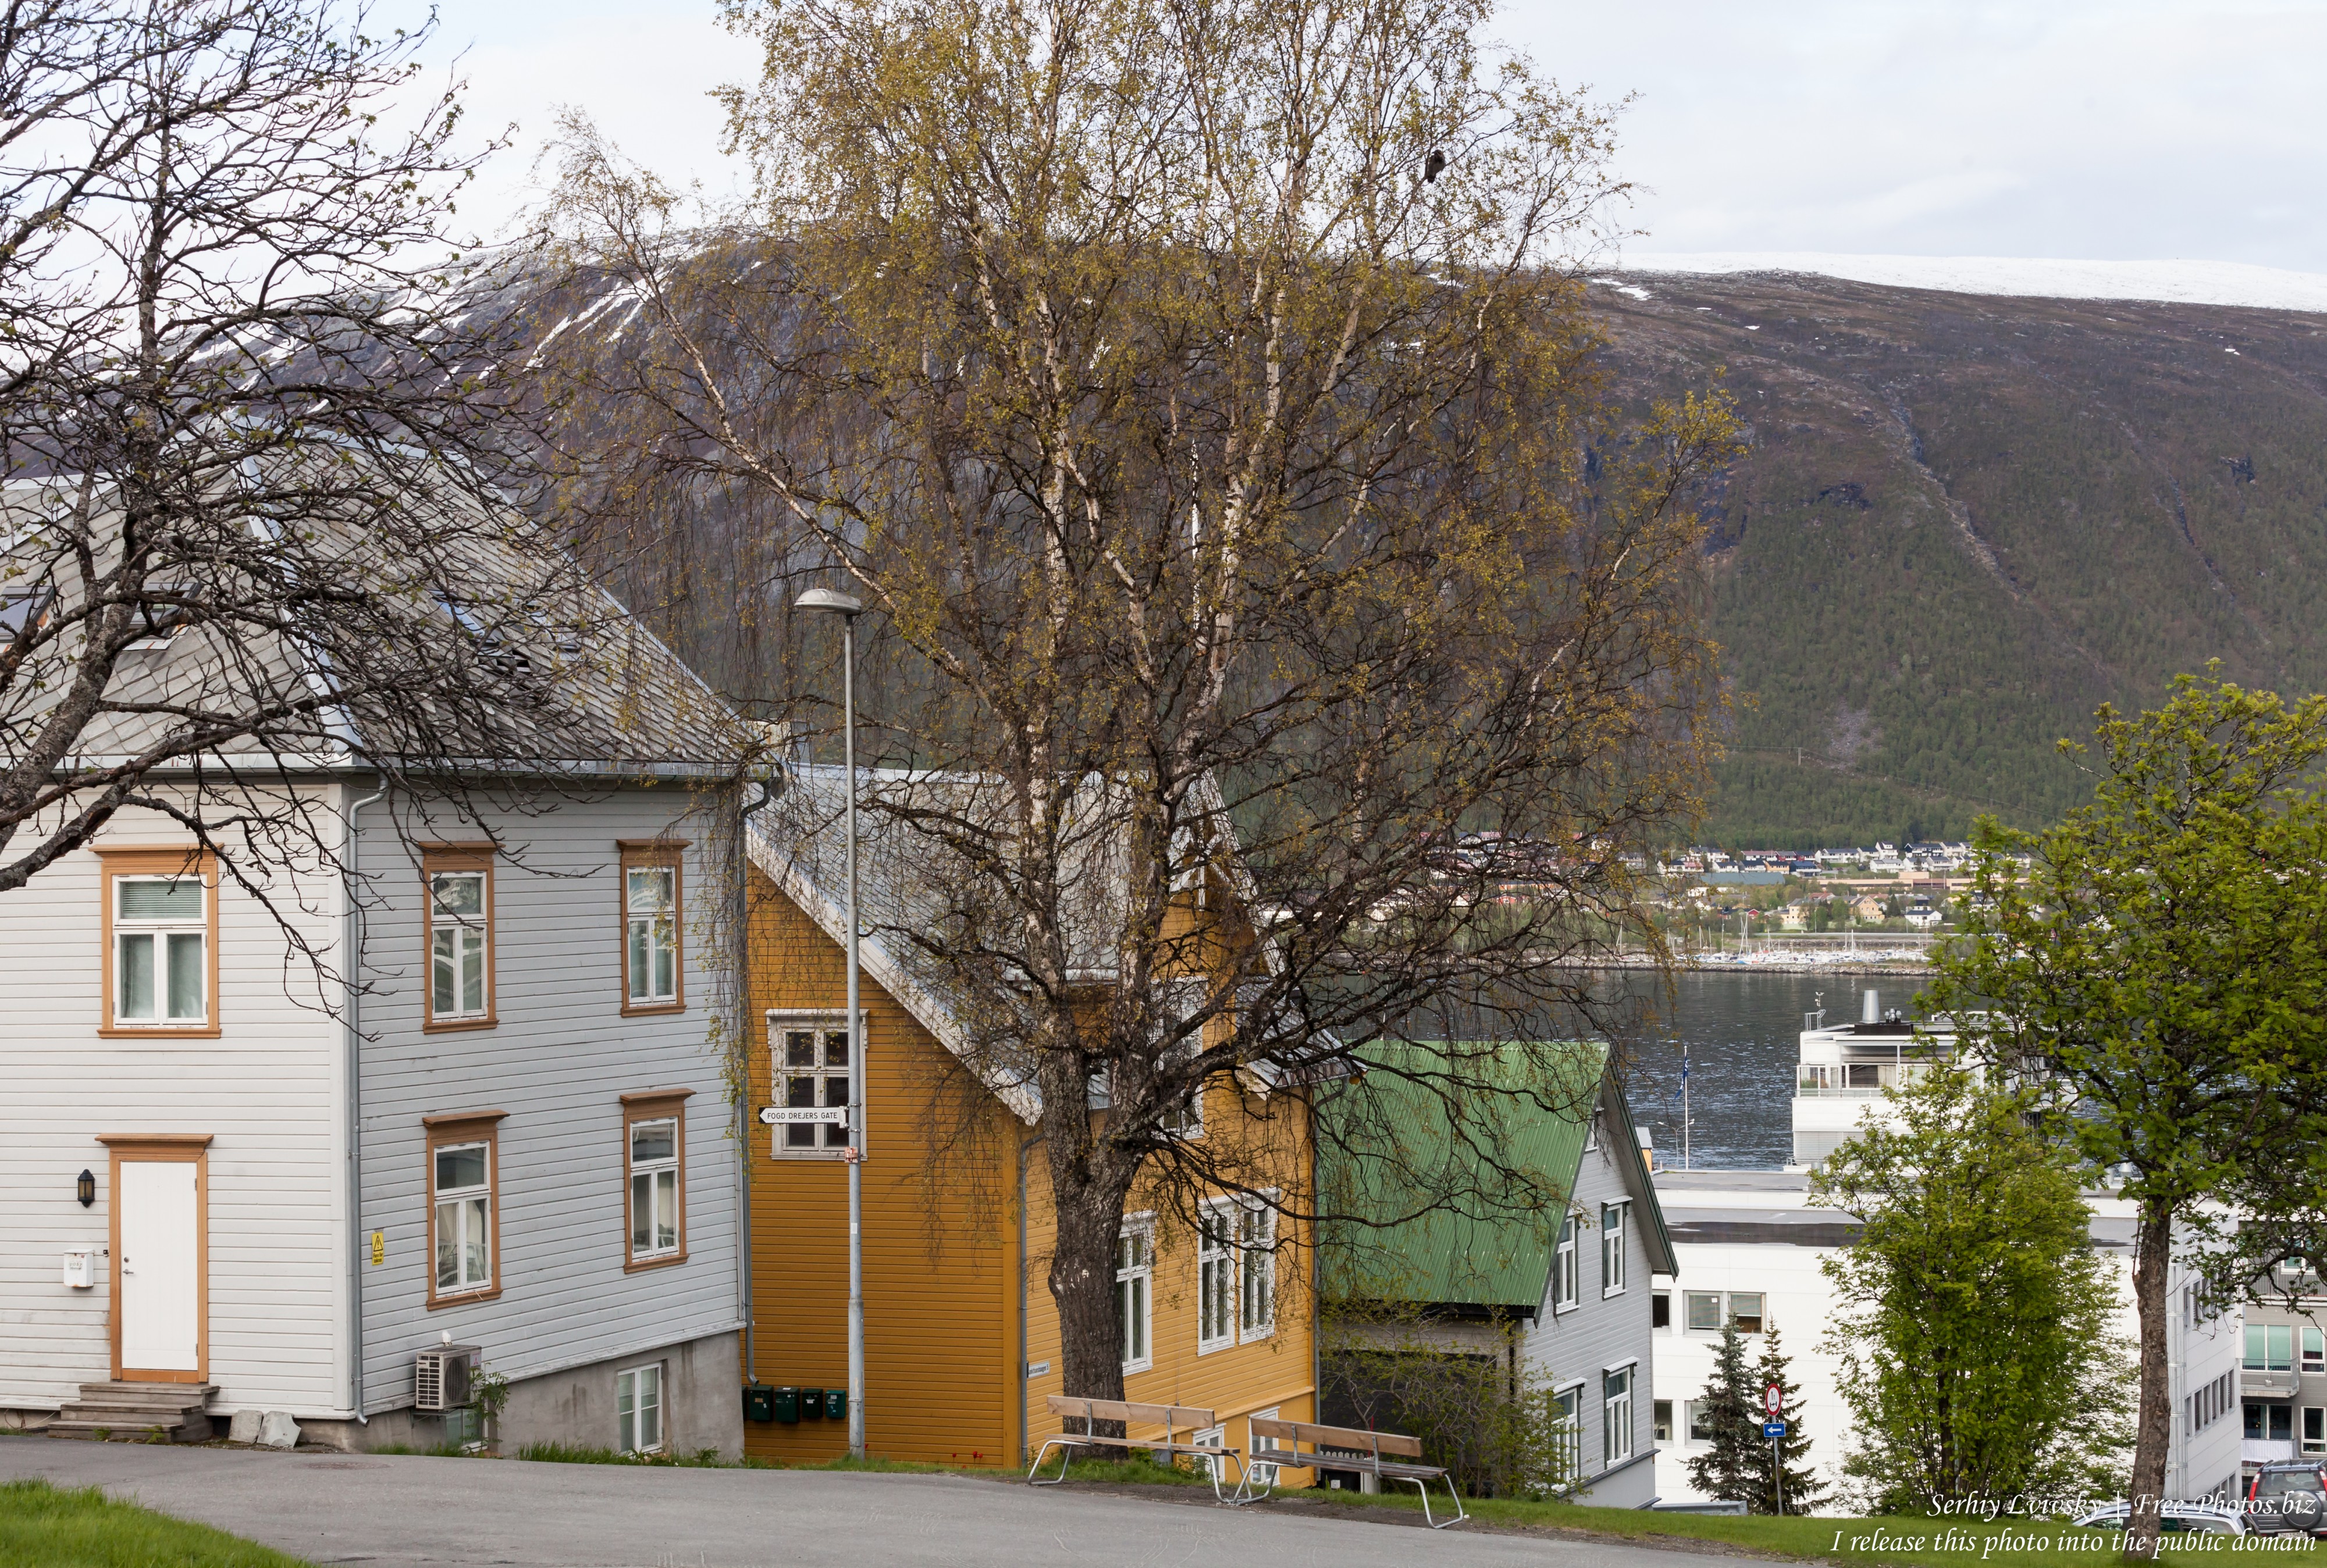 Tromso, Norway, photographed in June 2018 by Serhiy Lvivsky, picture 57